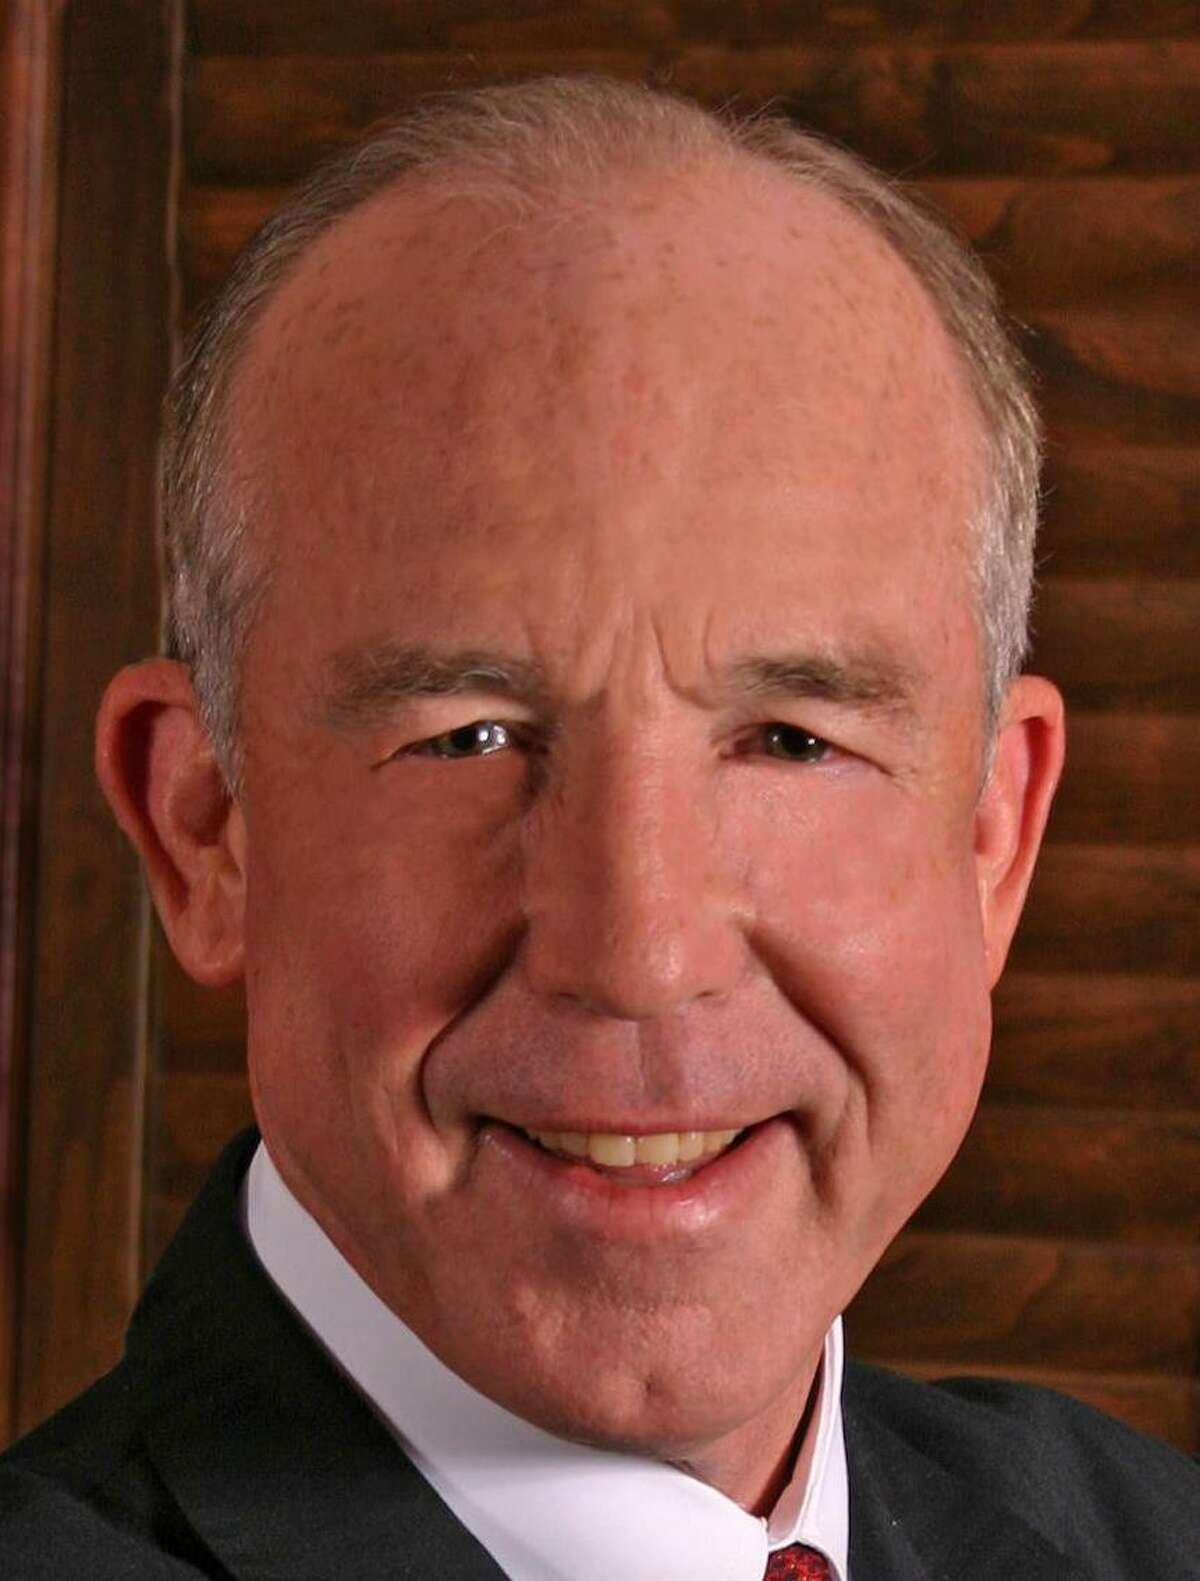 Steven Hotze is president of Campaign for Houston, as well as the Conservative Republicans of Harris County.